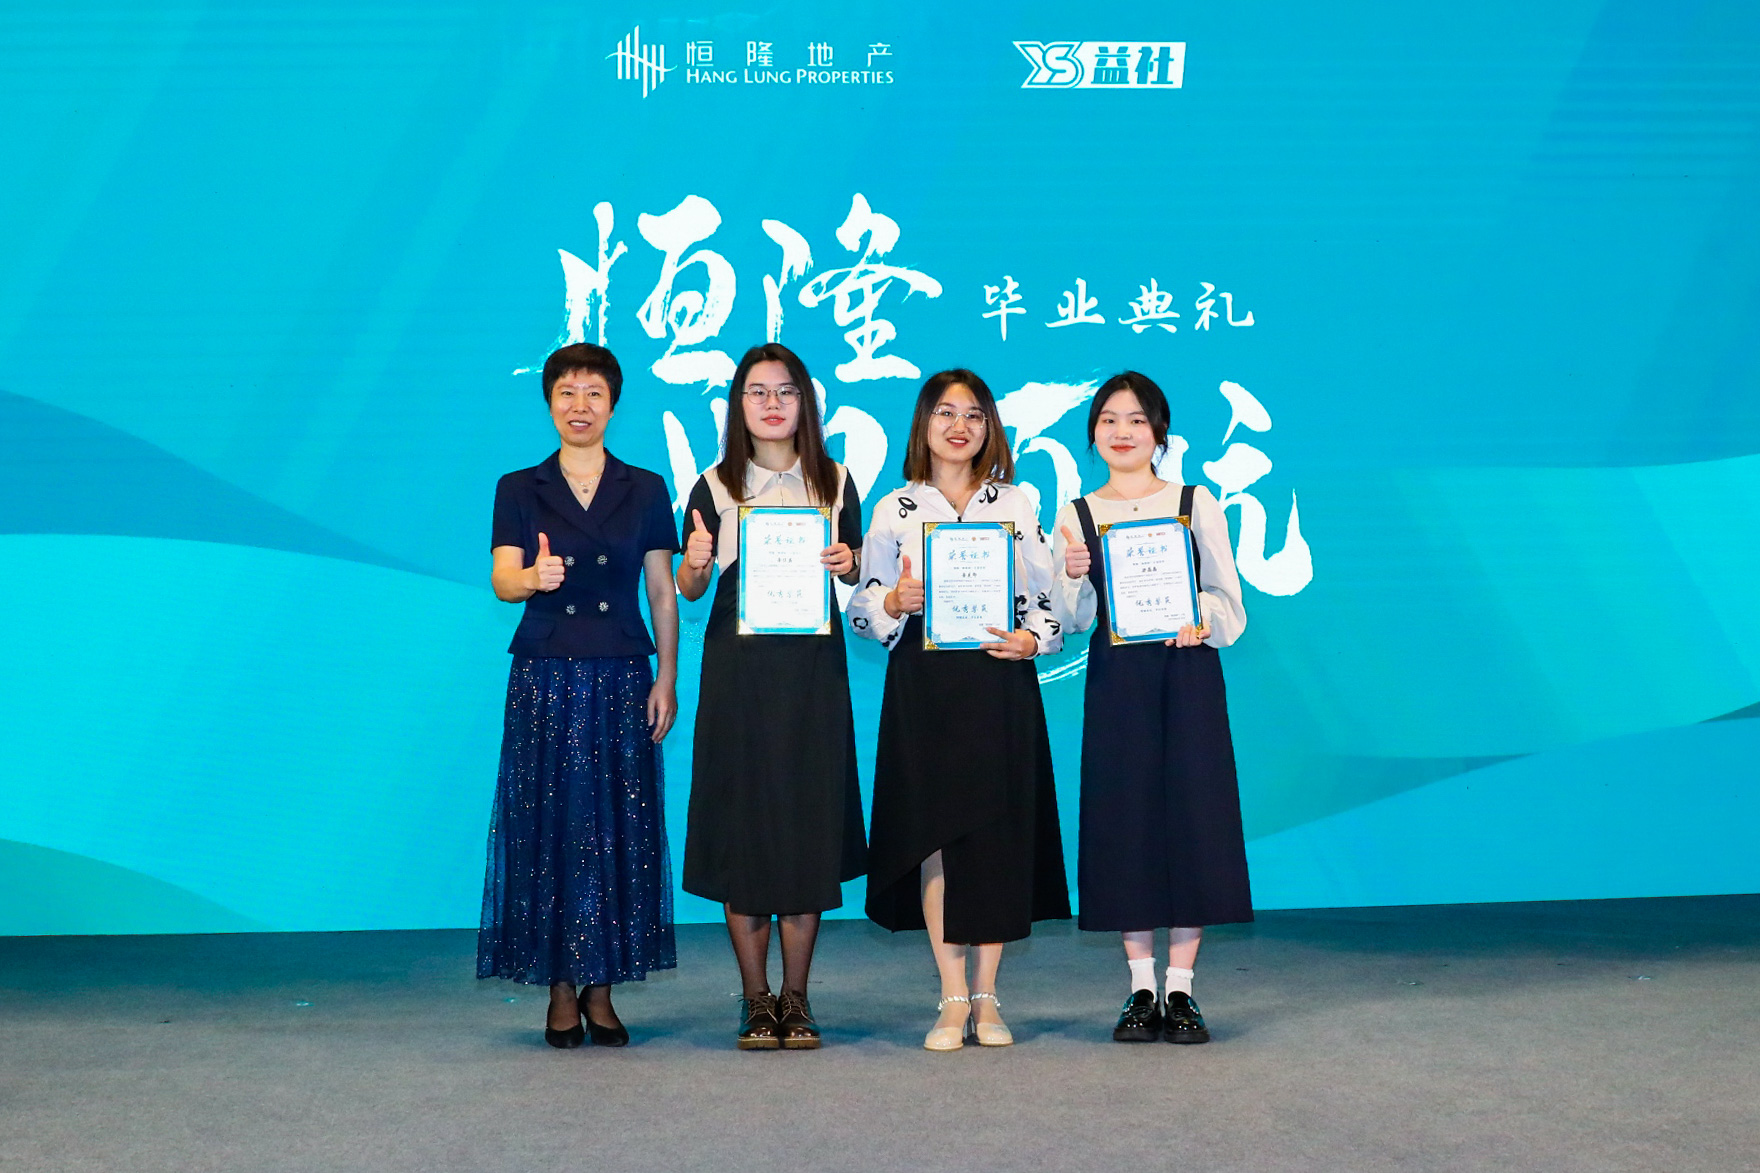 Ms. Song Yan (first left), President of the Xuhui District Women’s Federation, presents Outstanding Program Participants Award to students, from left, Li Jiayi from Shanghai Jiao Tong University, Li Meijun from Shanghai Jiao Tong University, and Liang Jingjing from Shanghai Institute of Visual Arts